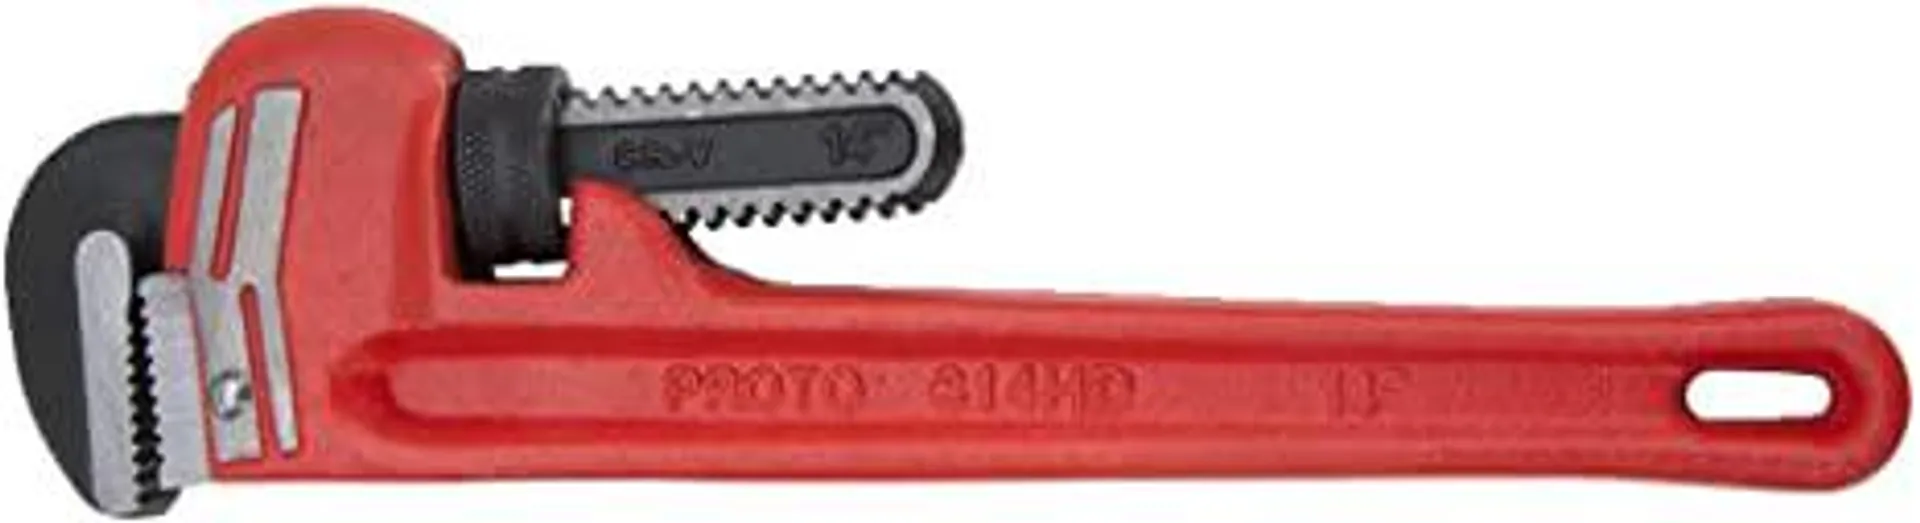 Stanley Proto J818HD Proto Heavy-Duty Cast Iron Pipe Wrench Red, 18"